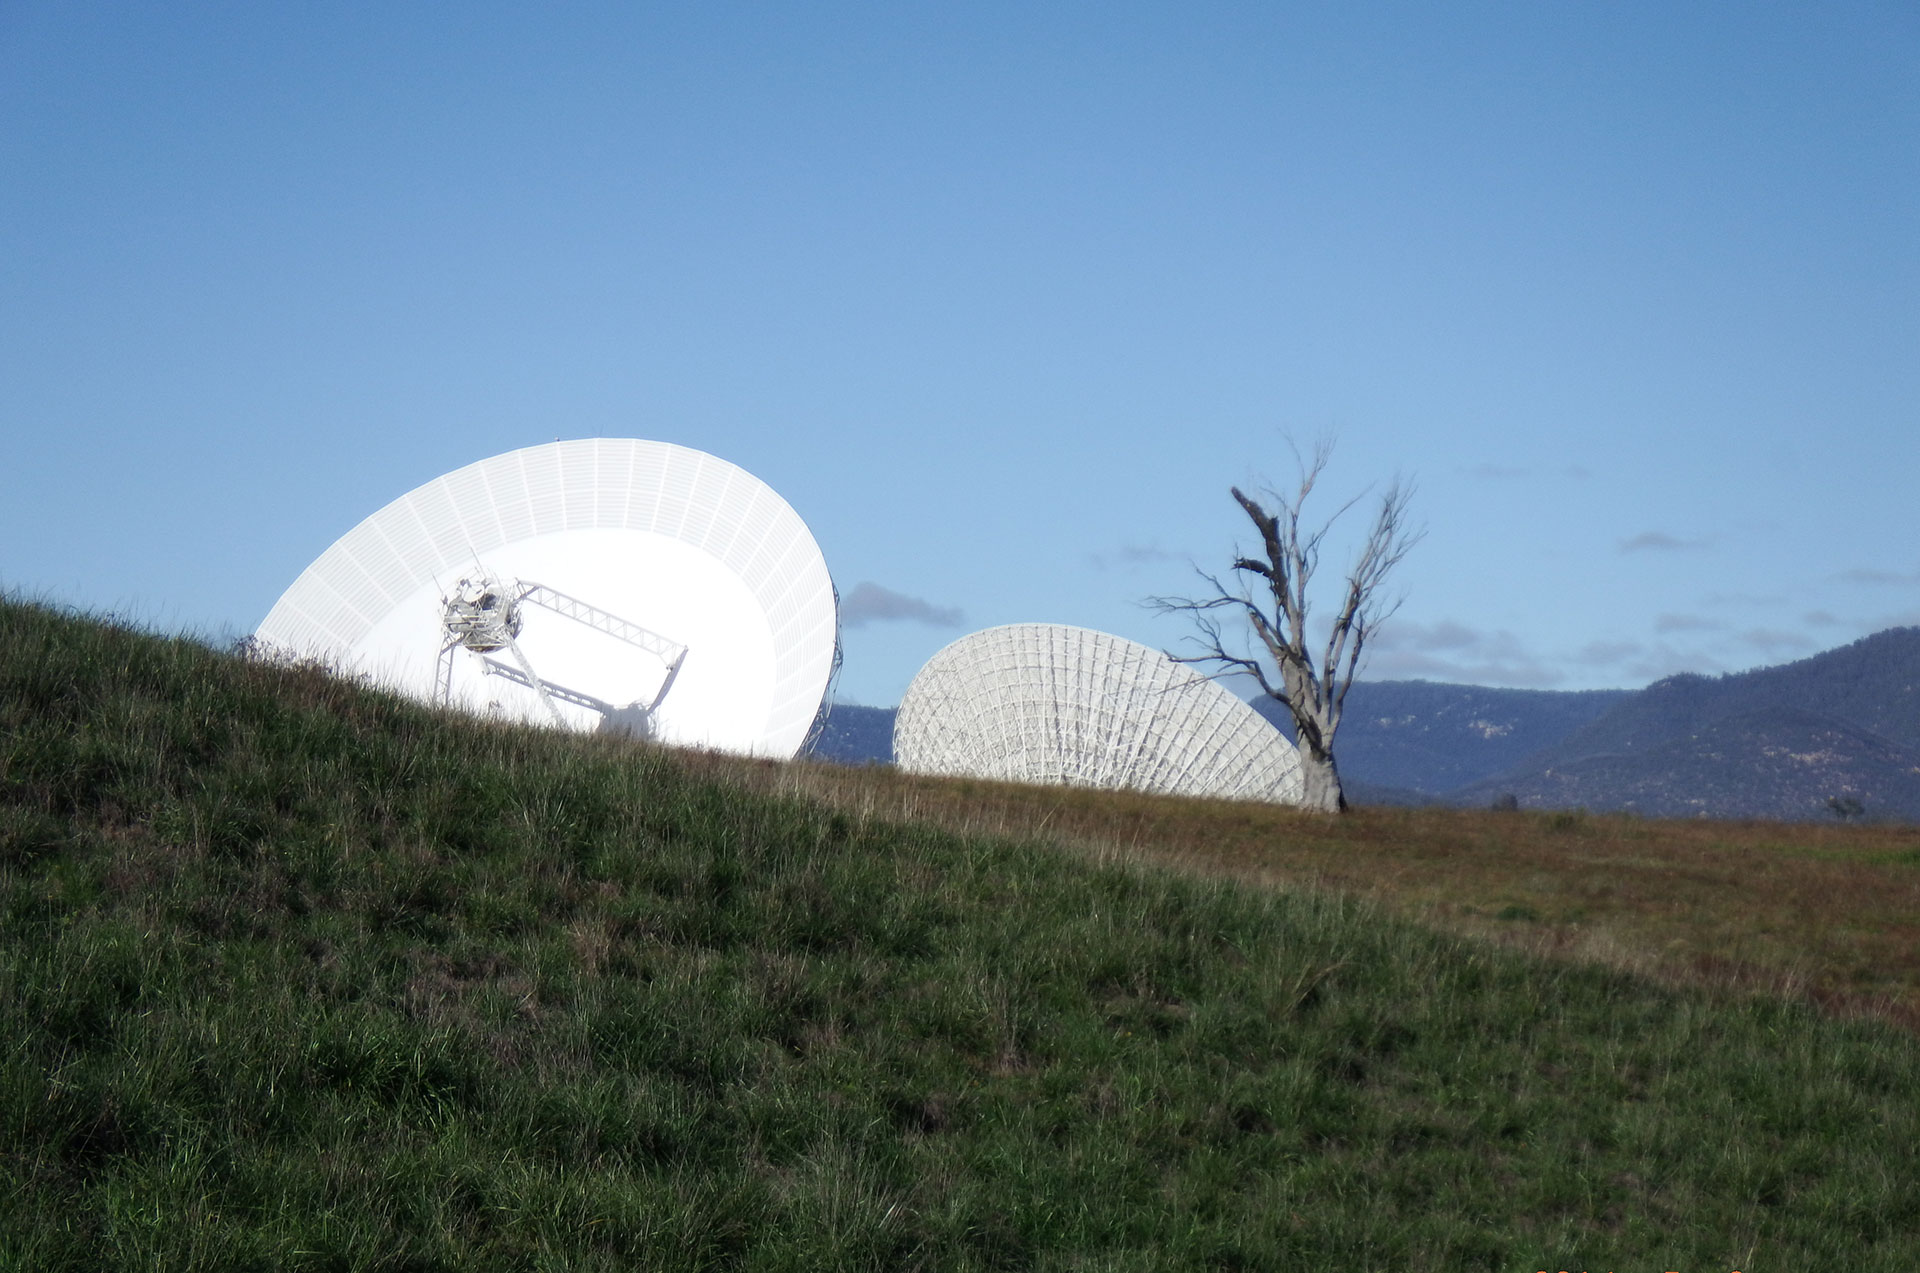 DSS34 (left) and DSS43 peak above the ground in this view from the new antenna construction area.